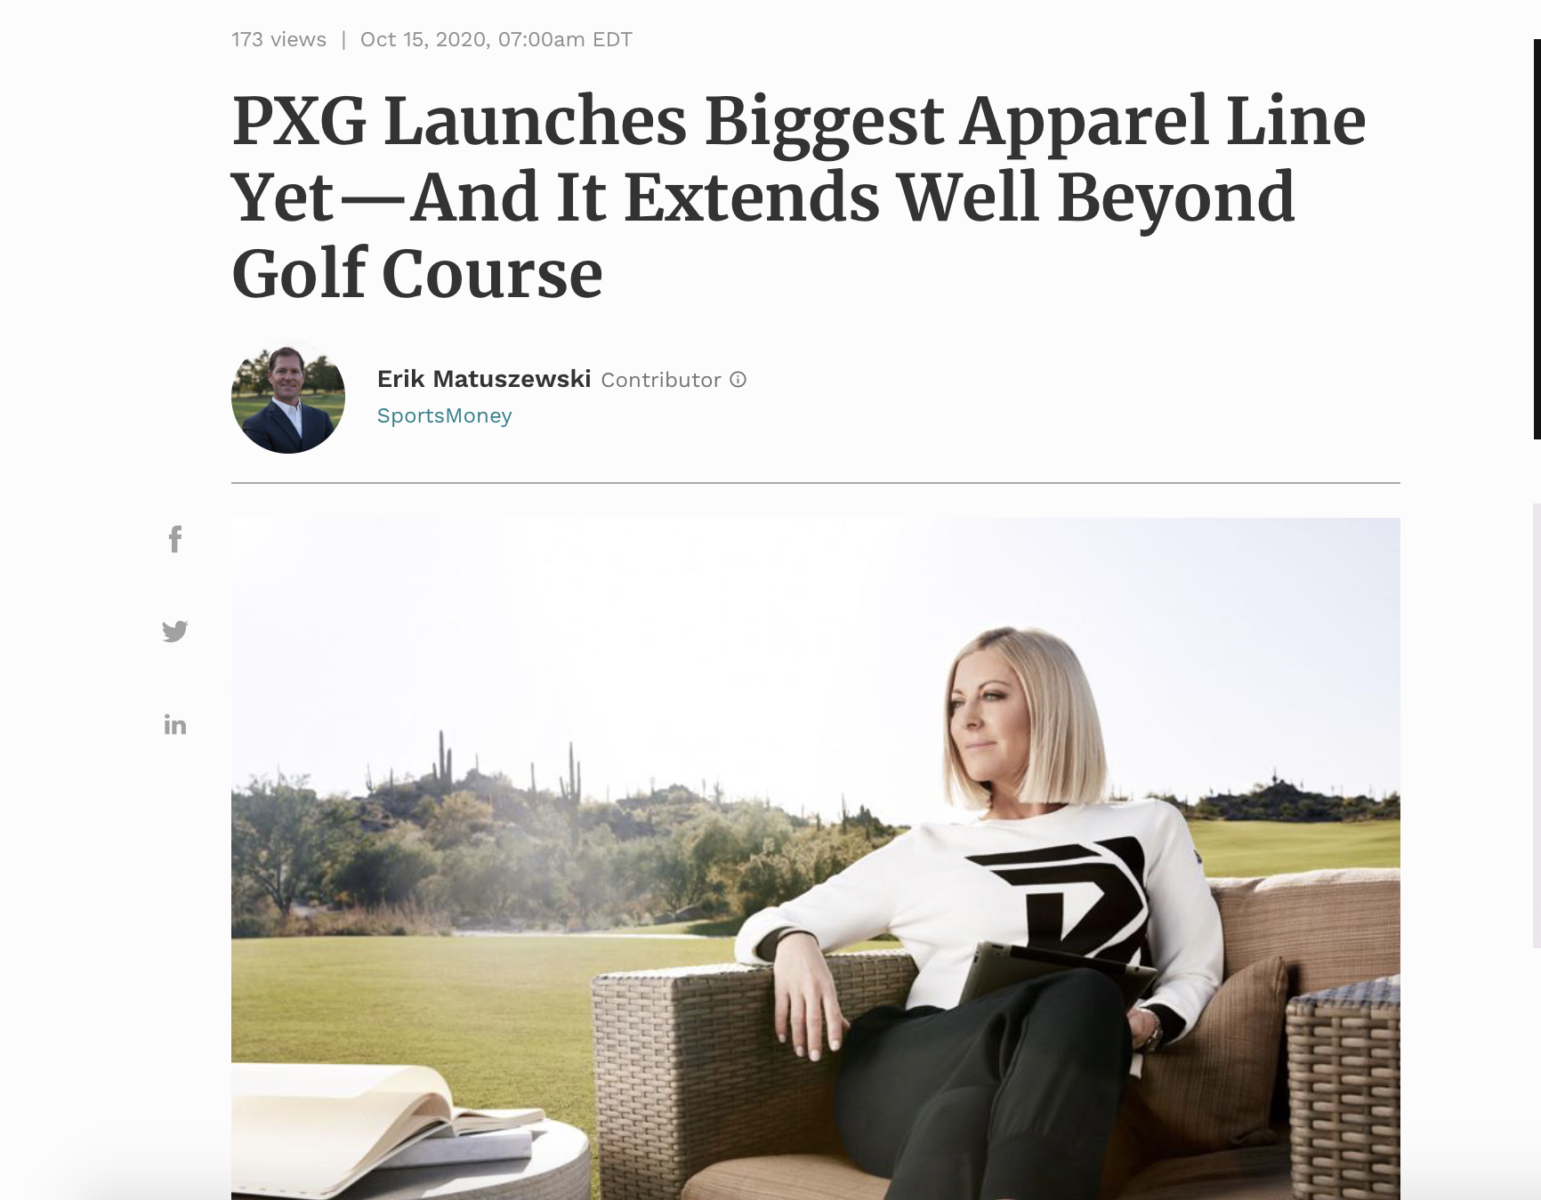 PXG Apparel article in Forbes